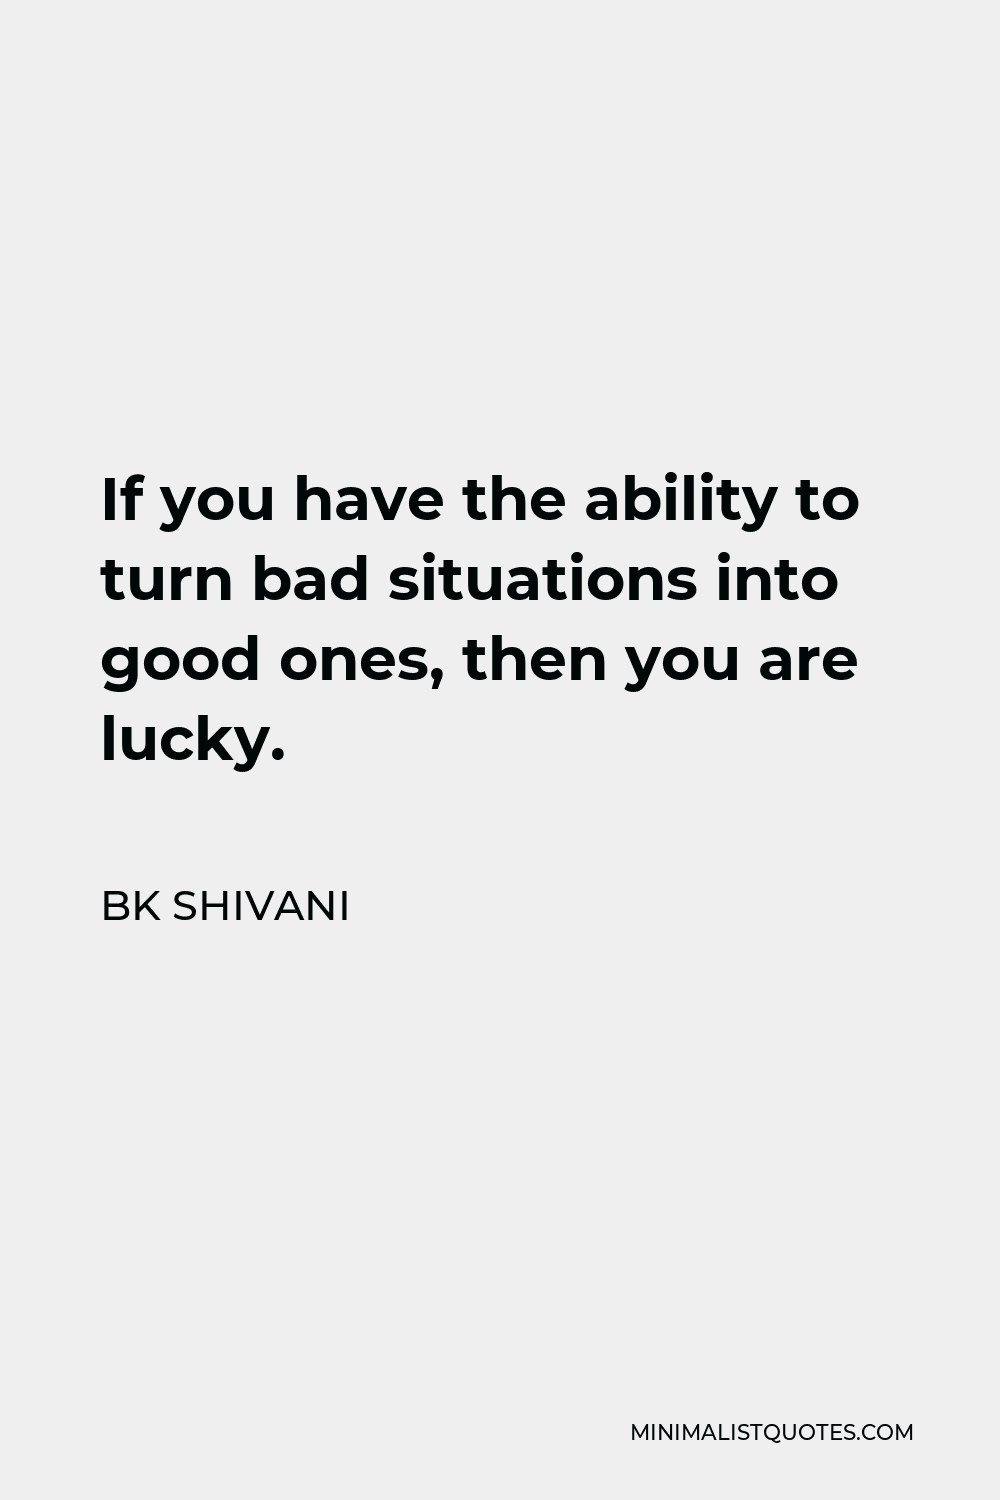 BK Shivani Quote - If you have the ability to turn bad situations into good ones, then you are lucky.